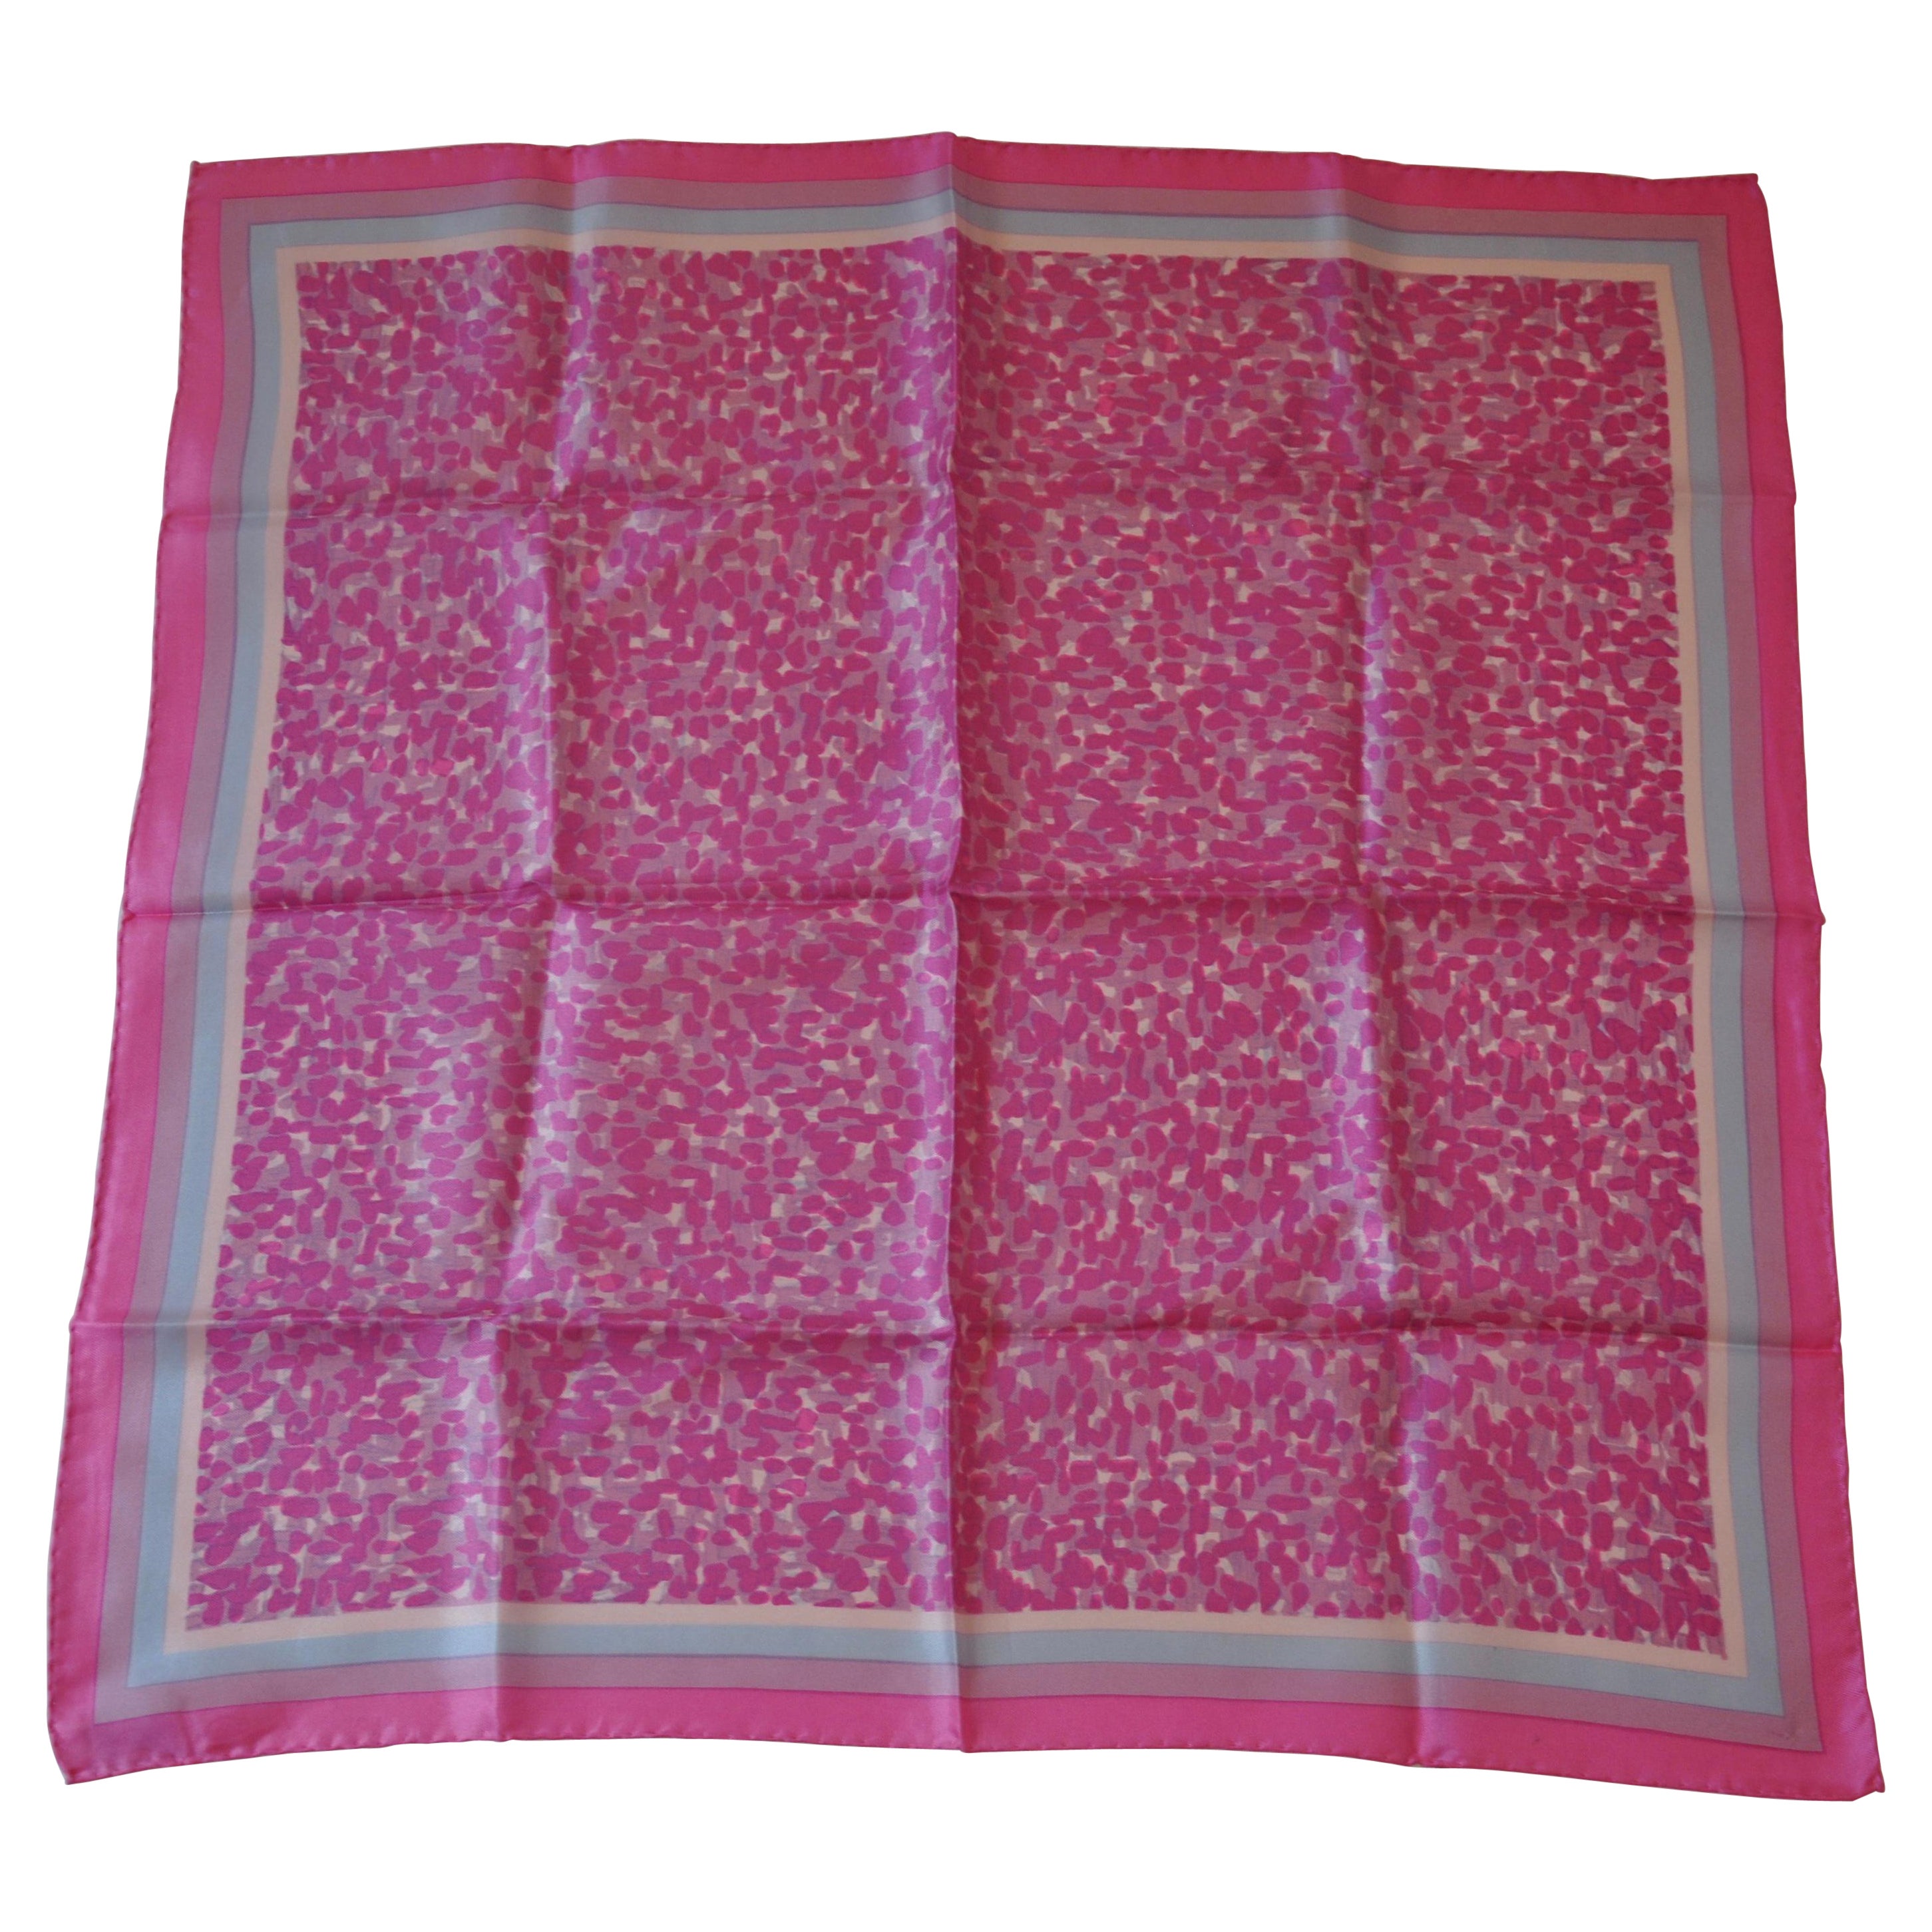 Lovely Shades of Fuchsia Specks Accented with Lavender Striped Border Silk Scarf For Sale